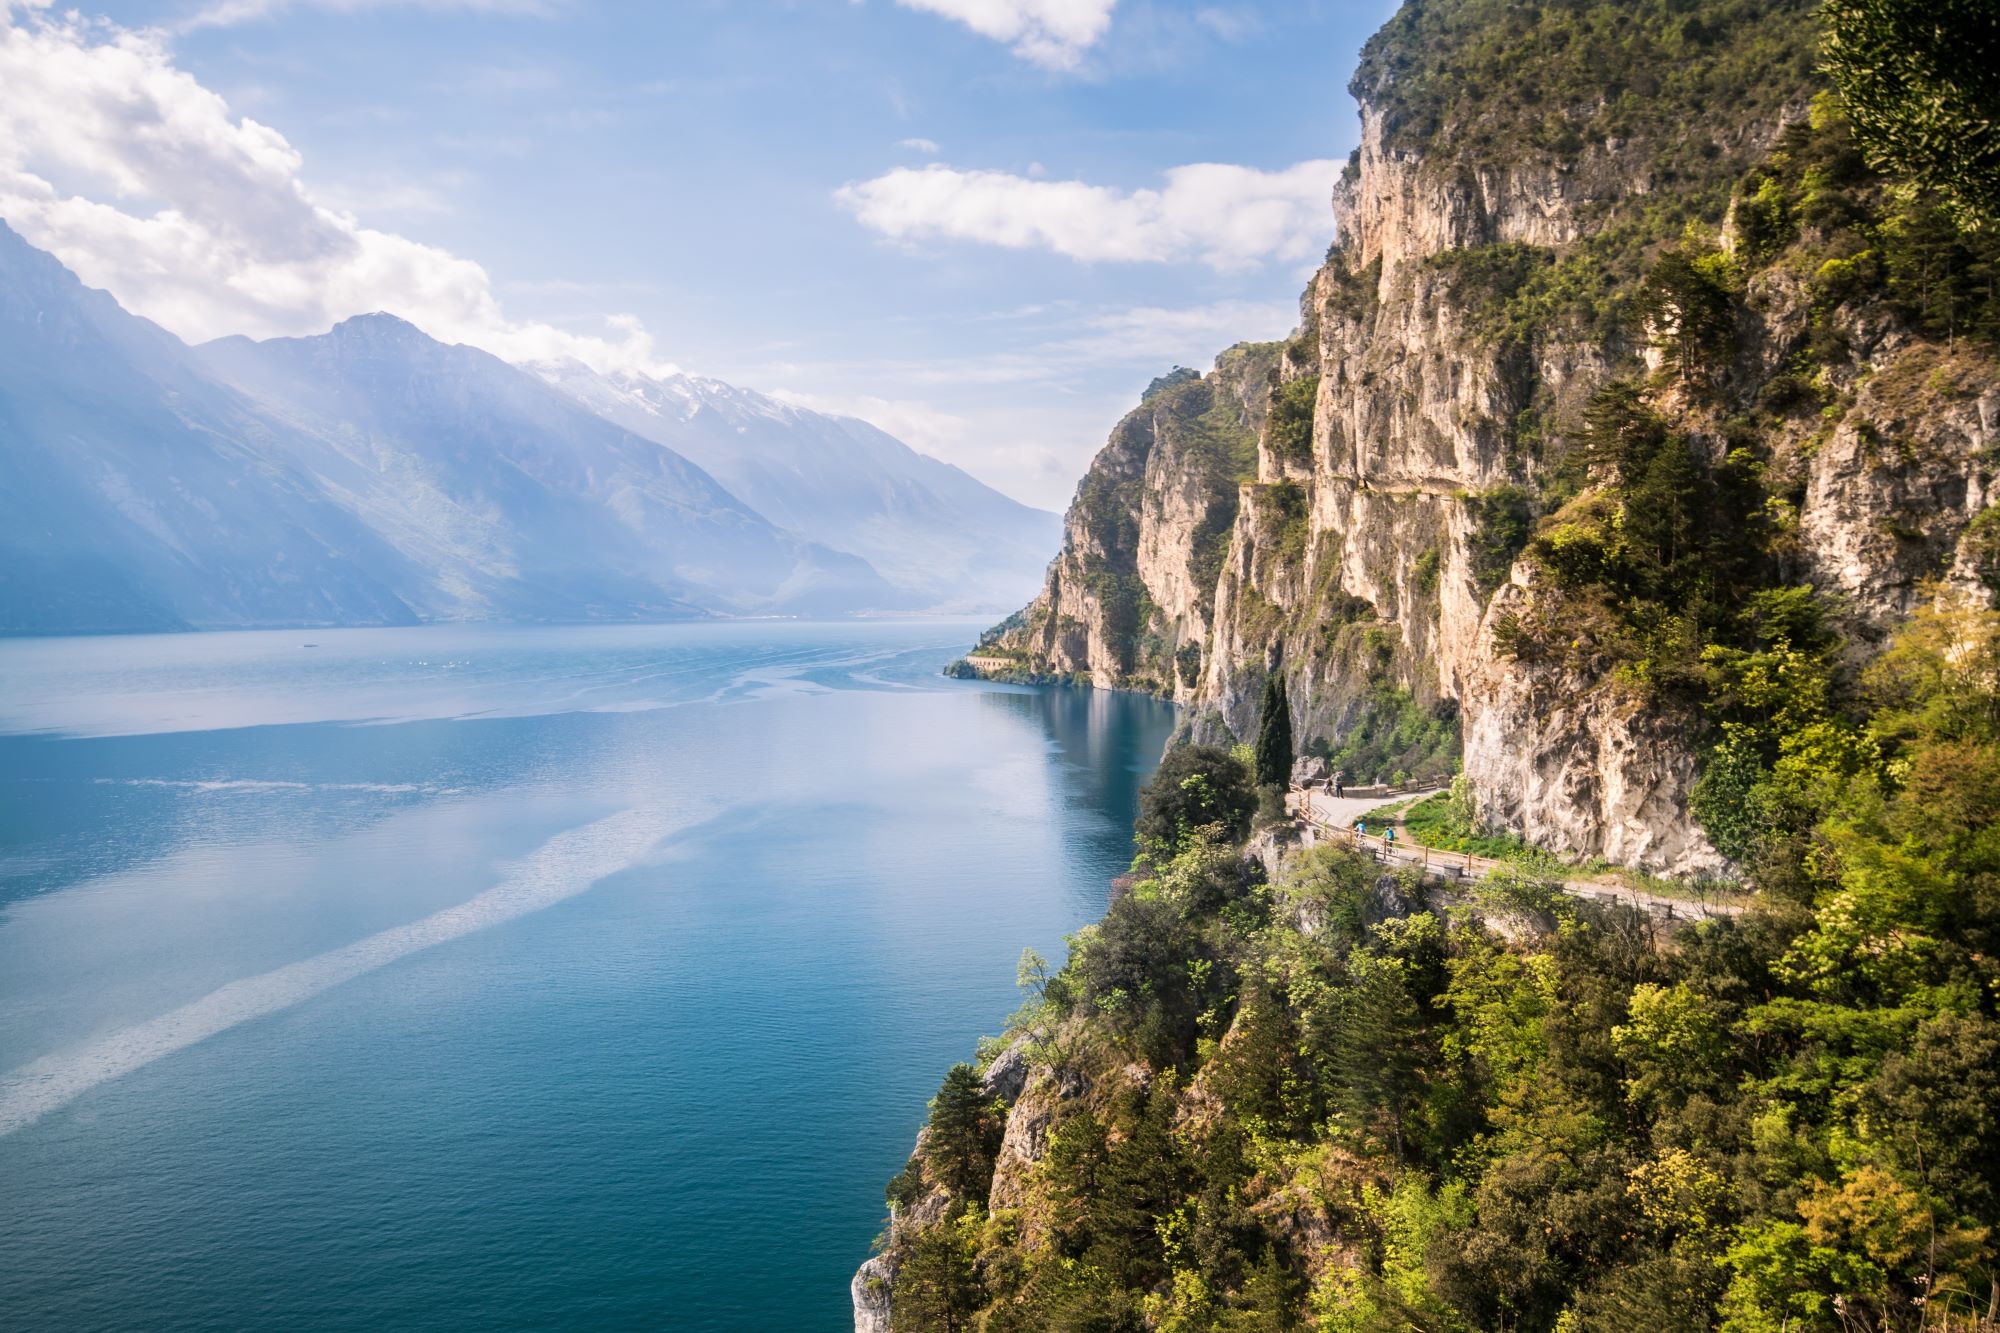 Breathtaking hikes with Lake Garda as your backdrop